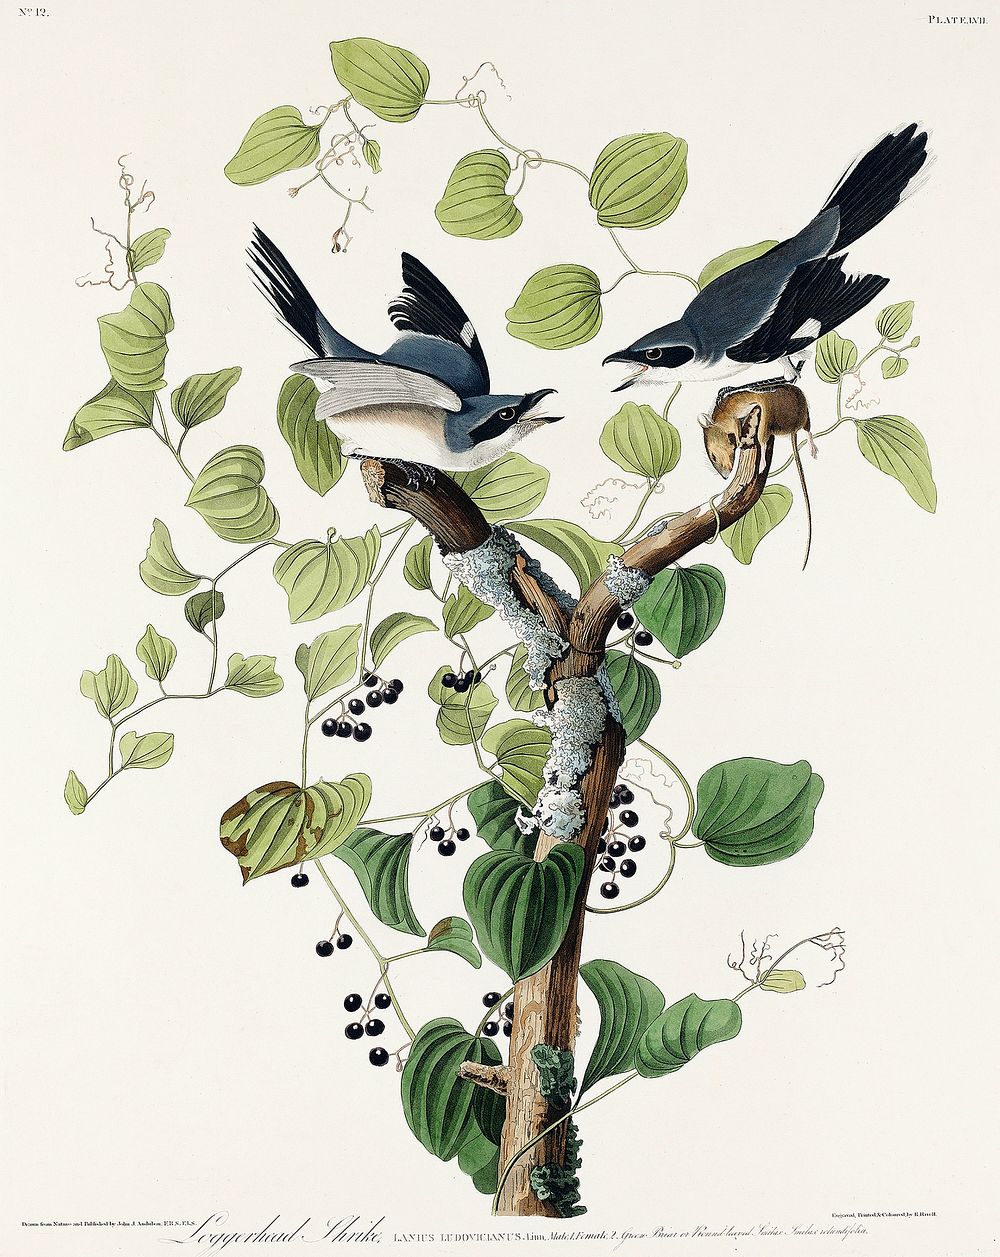 Loggerhead Shrike from Birds of America (1827) by John James Audubon, etched by William Home Lizars. Original from…